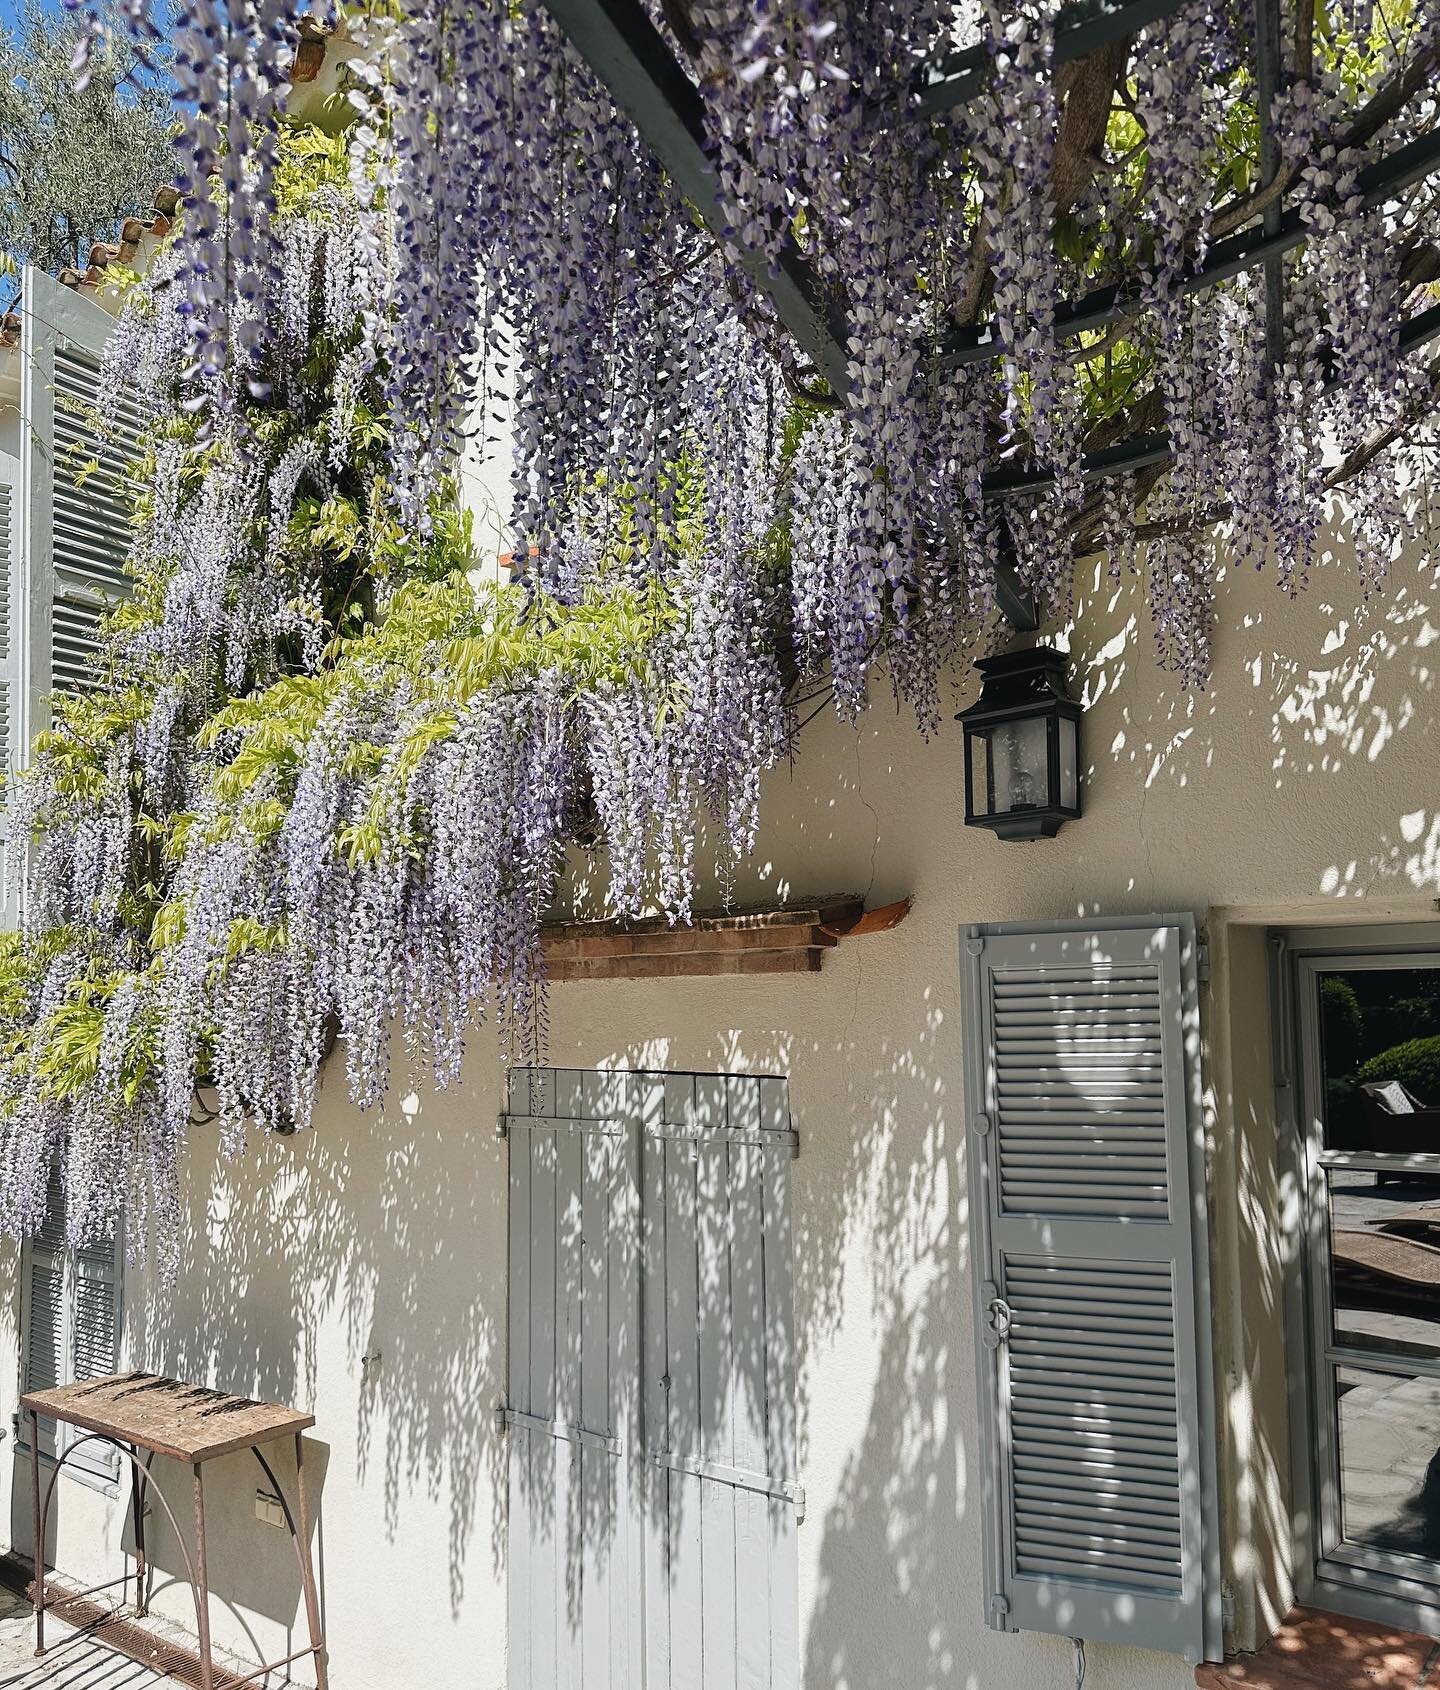 Starting Easter weekend off with the most amazing start to wisteria season🍃